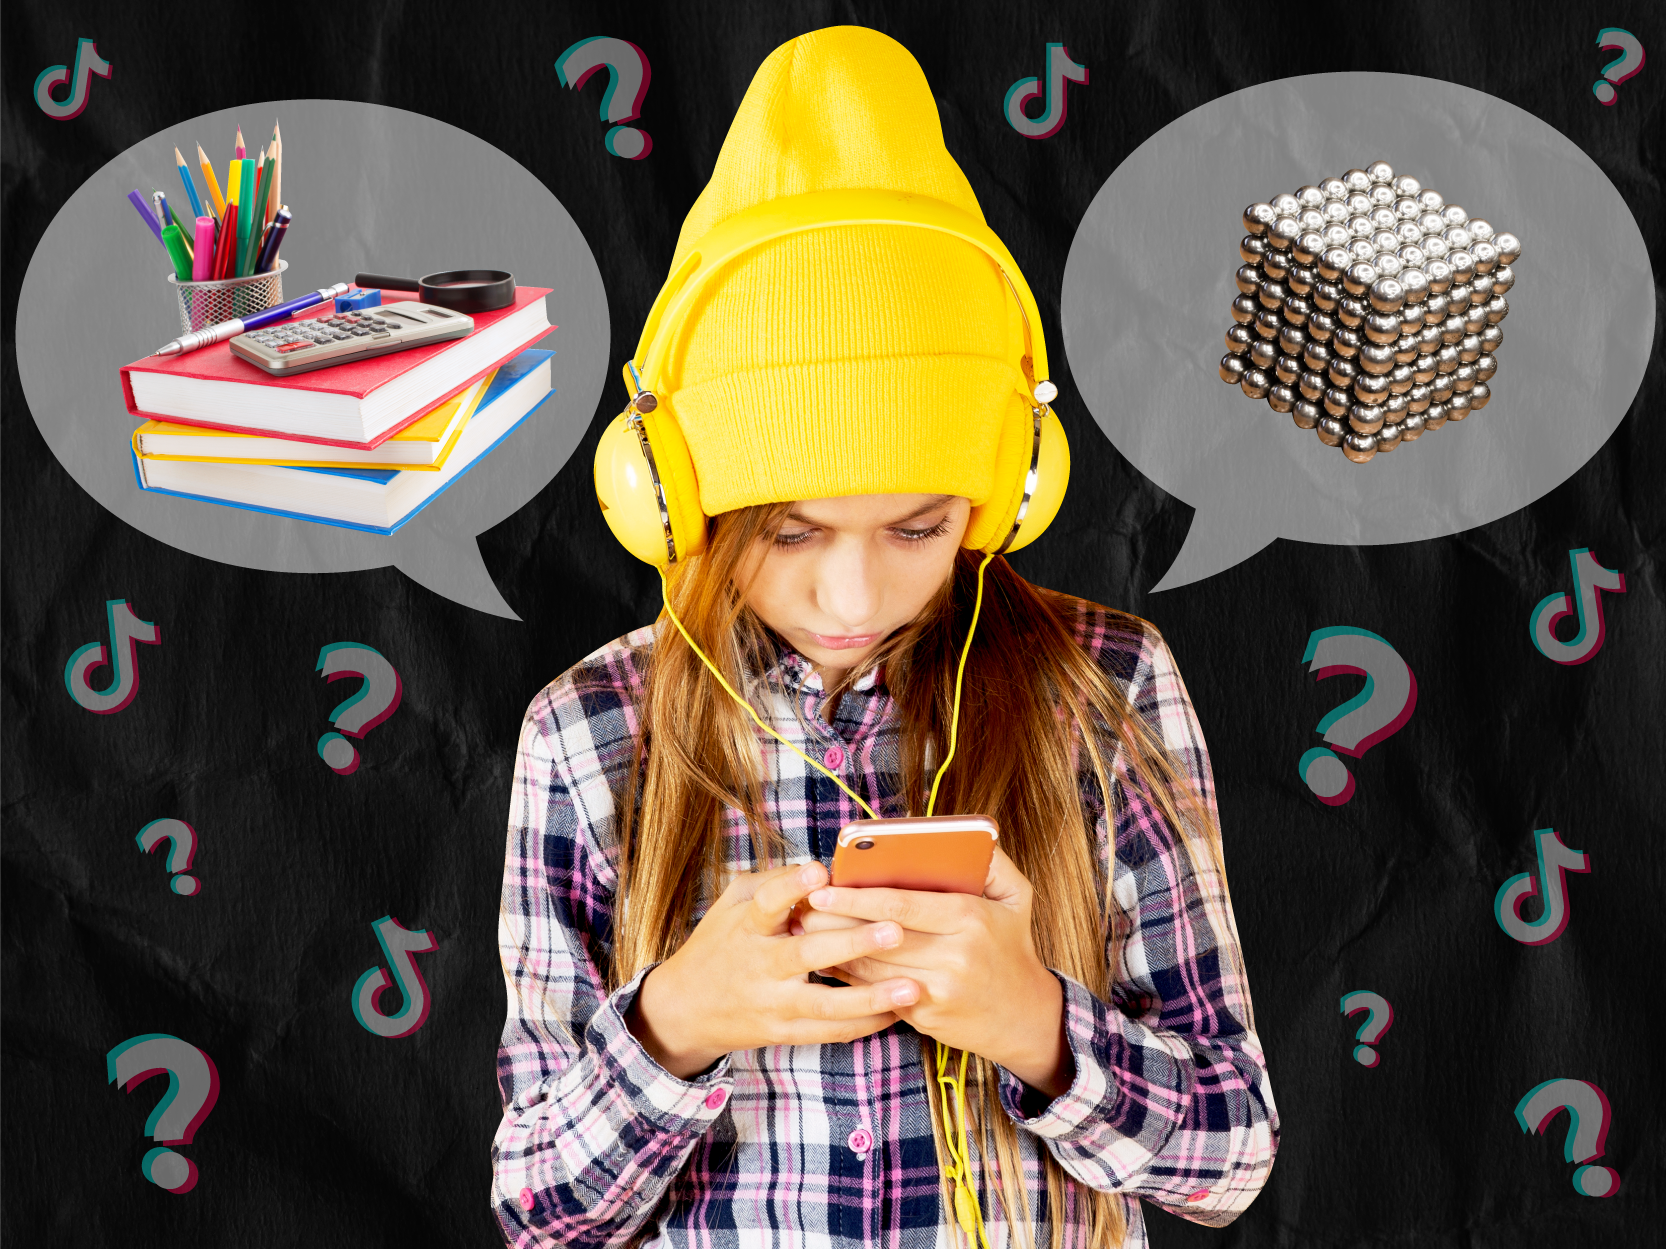 A graphic composite of a teenager on their iphone, surrounded by thought bubbles of school supples and magnets, with scattered tiktok logos and question marks.